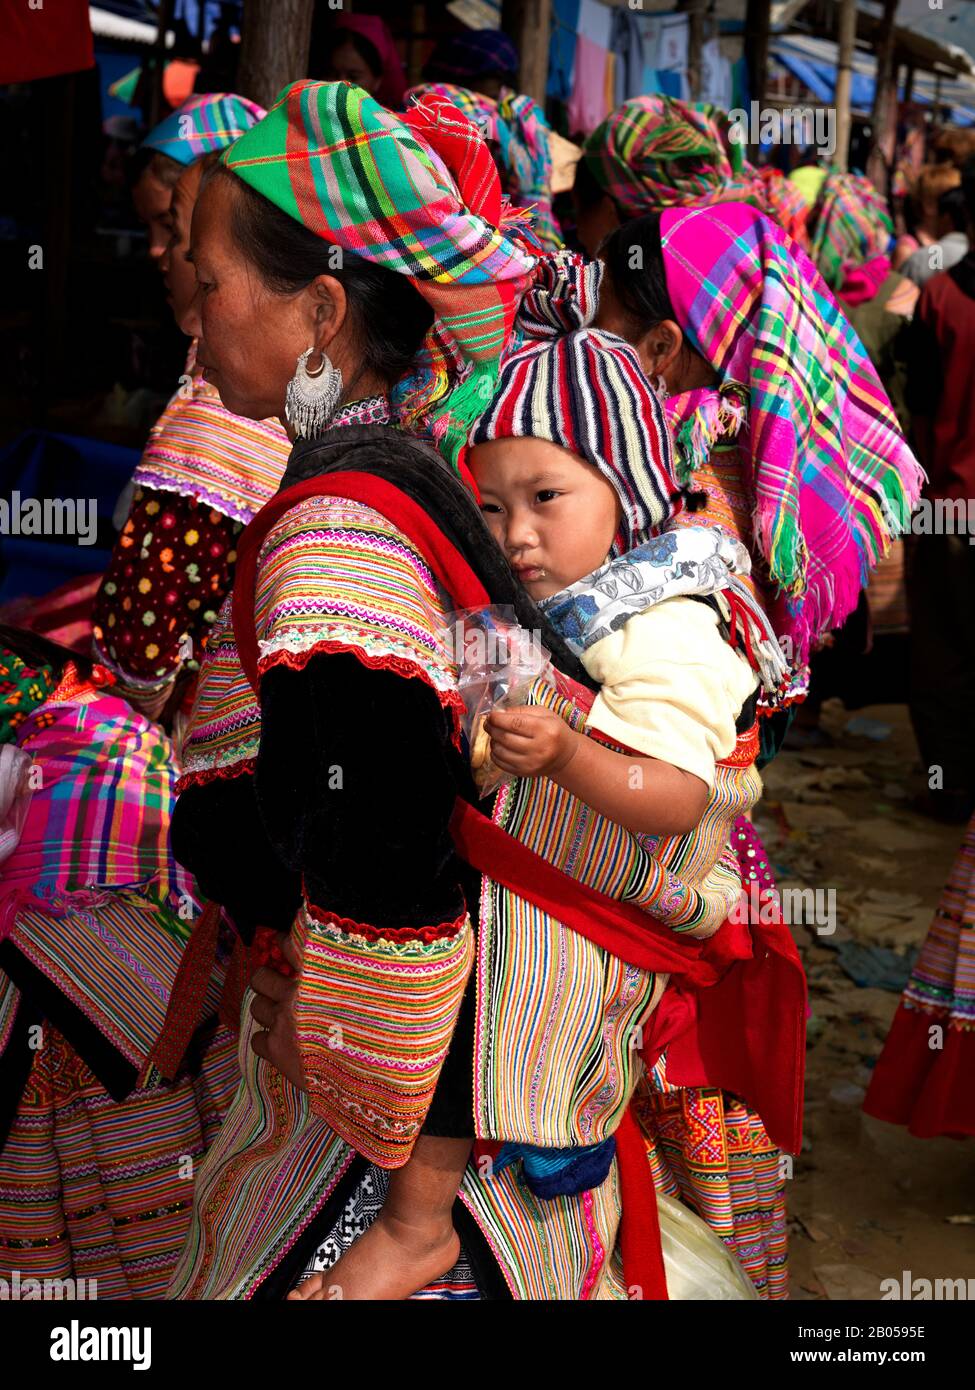 Flower Hmong woman carrying baby on her back, Bac Ha Sunday Market, Lao Cai Province, Vietnam Stock Photo